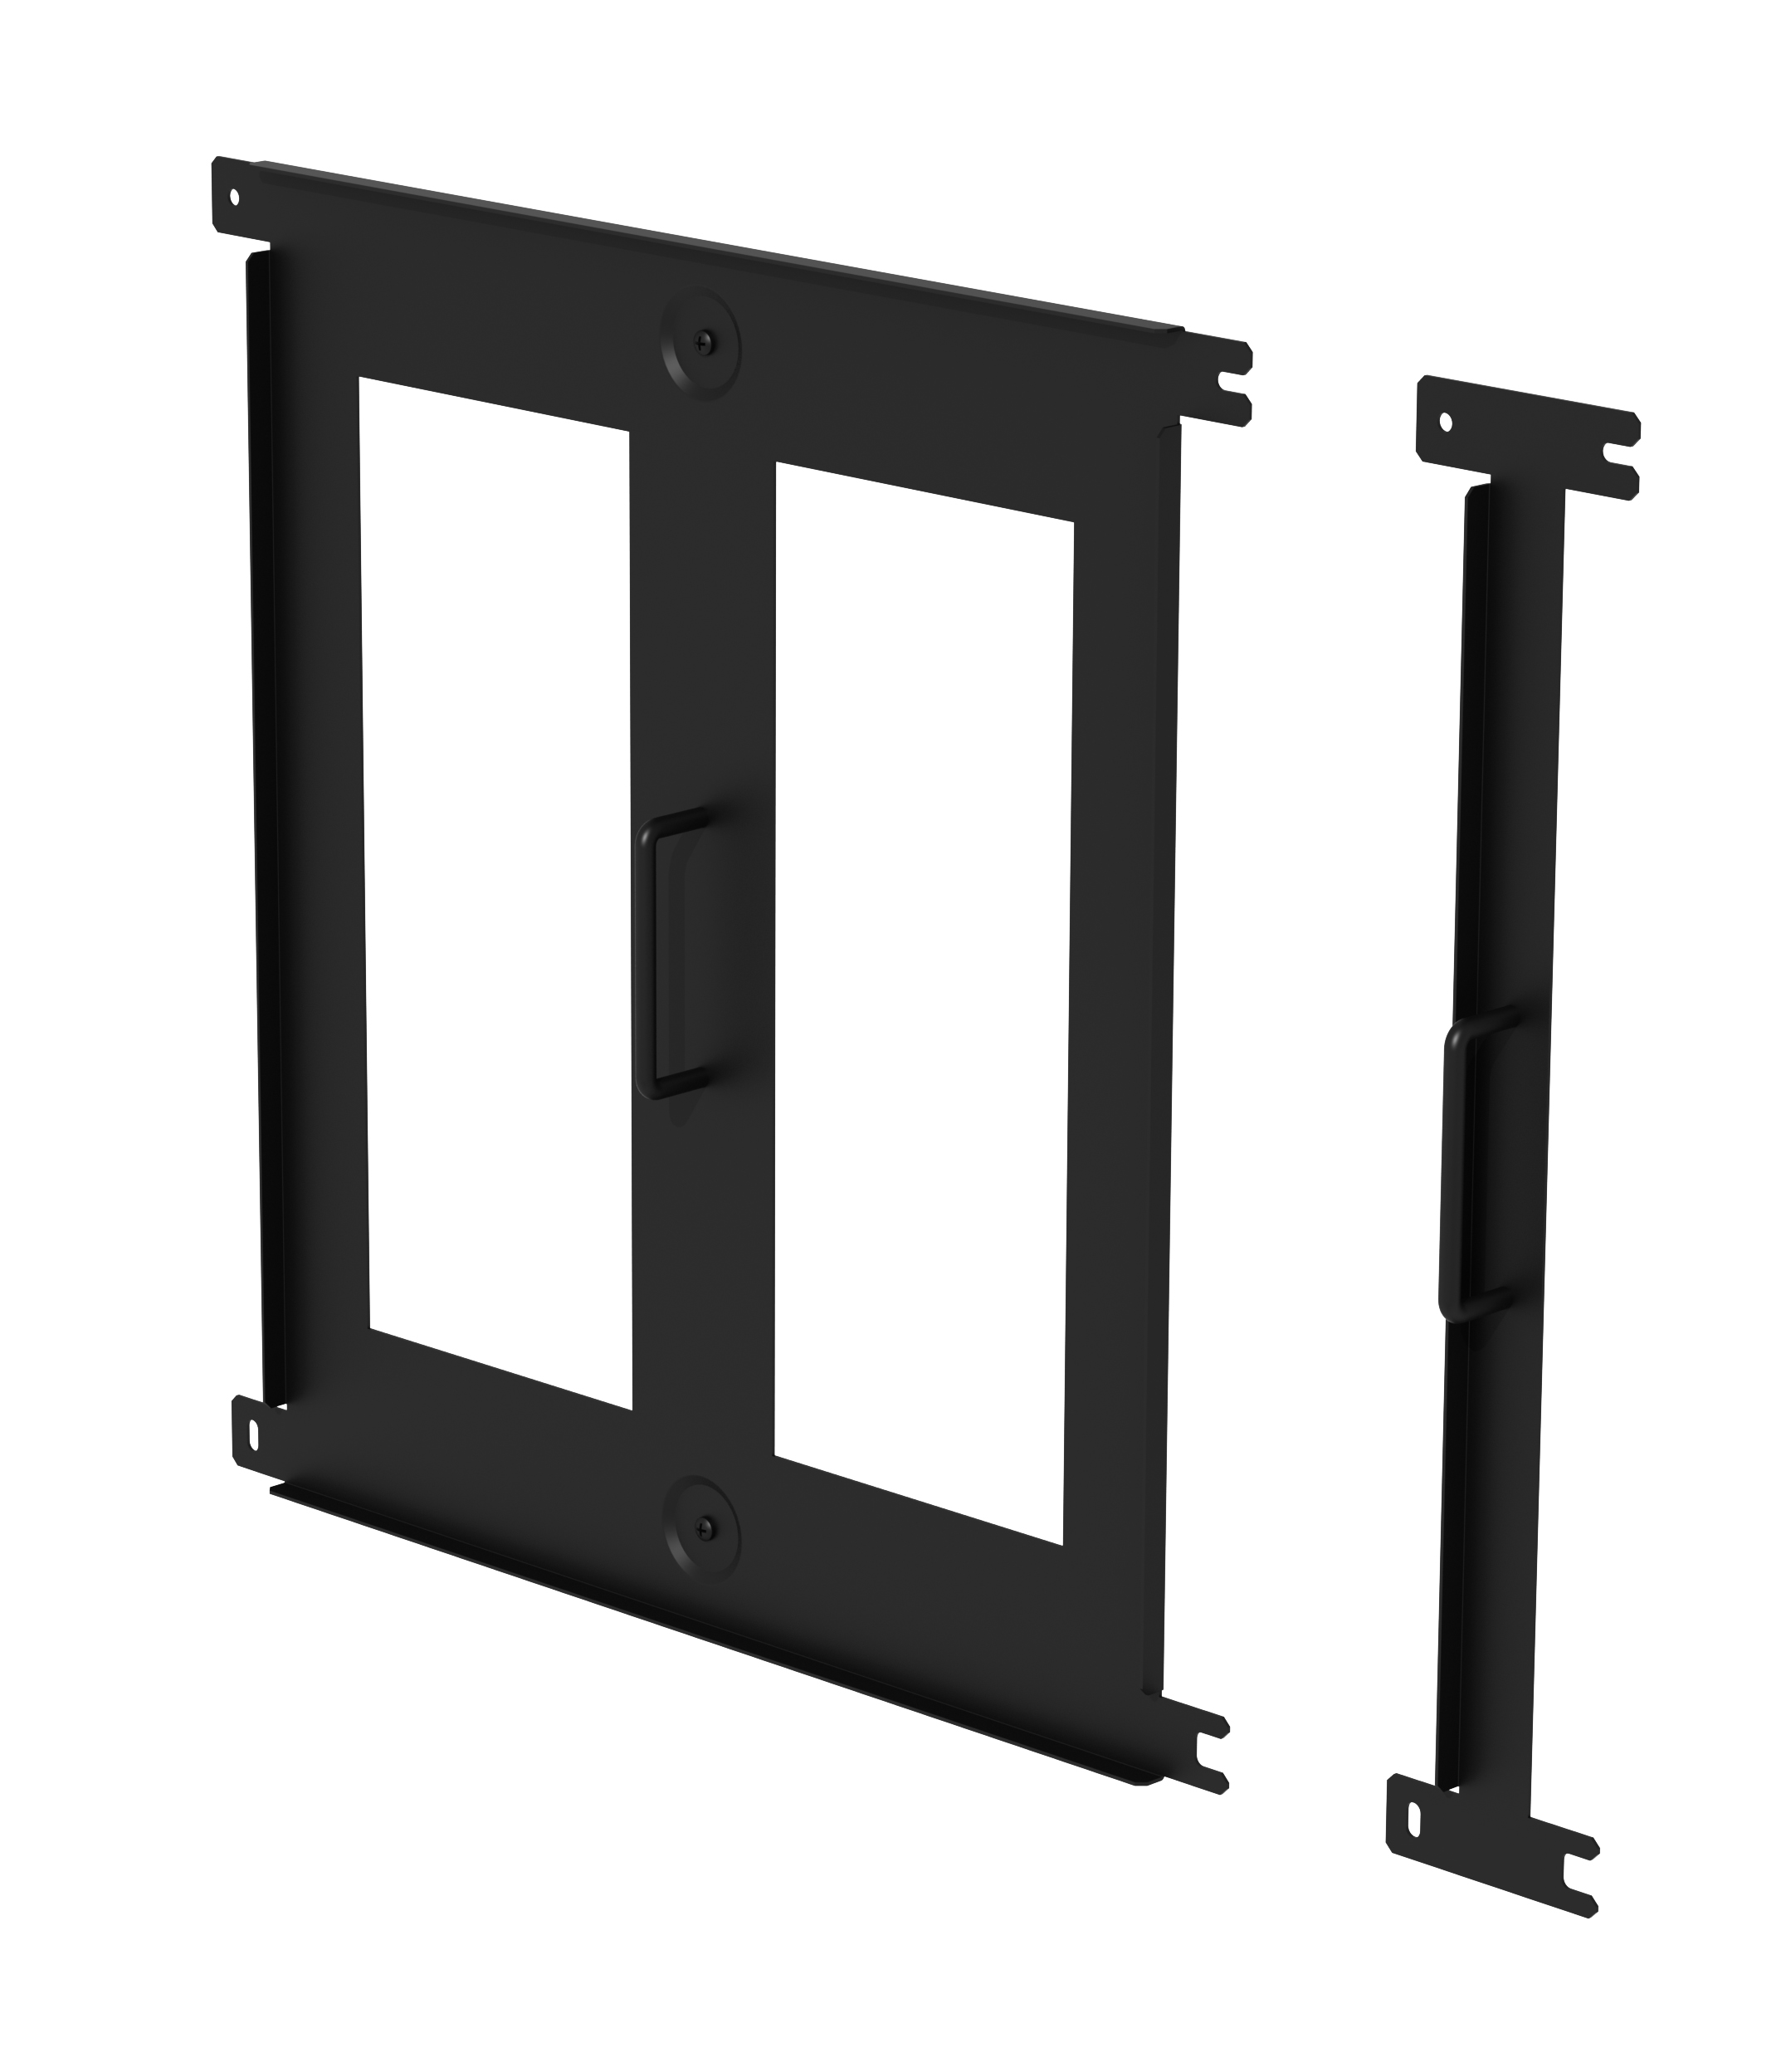 DS-VWRS039 Reusable Video Wall Spacer